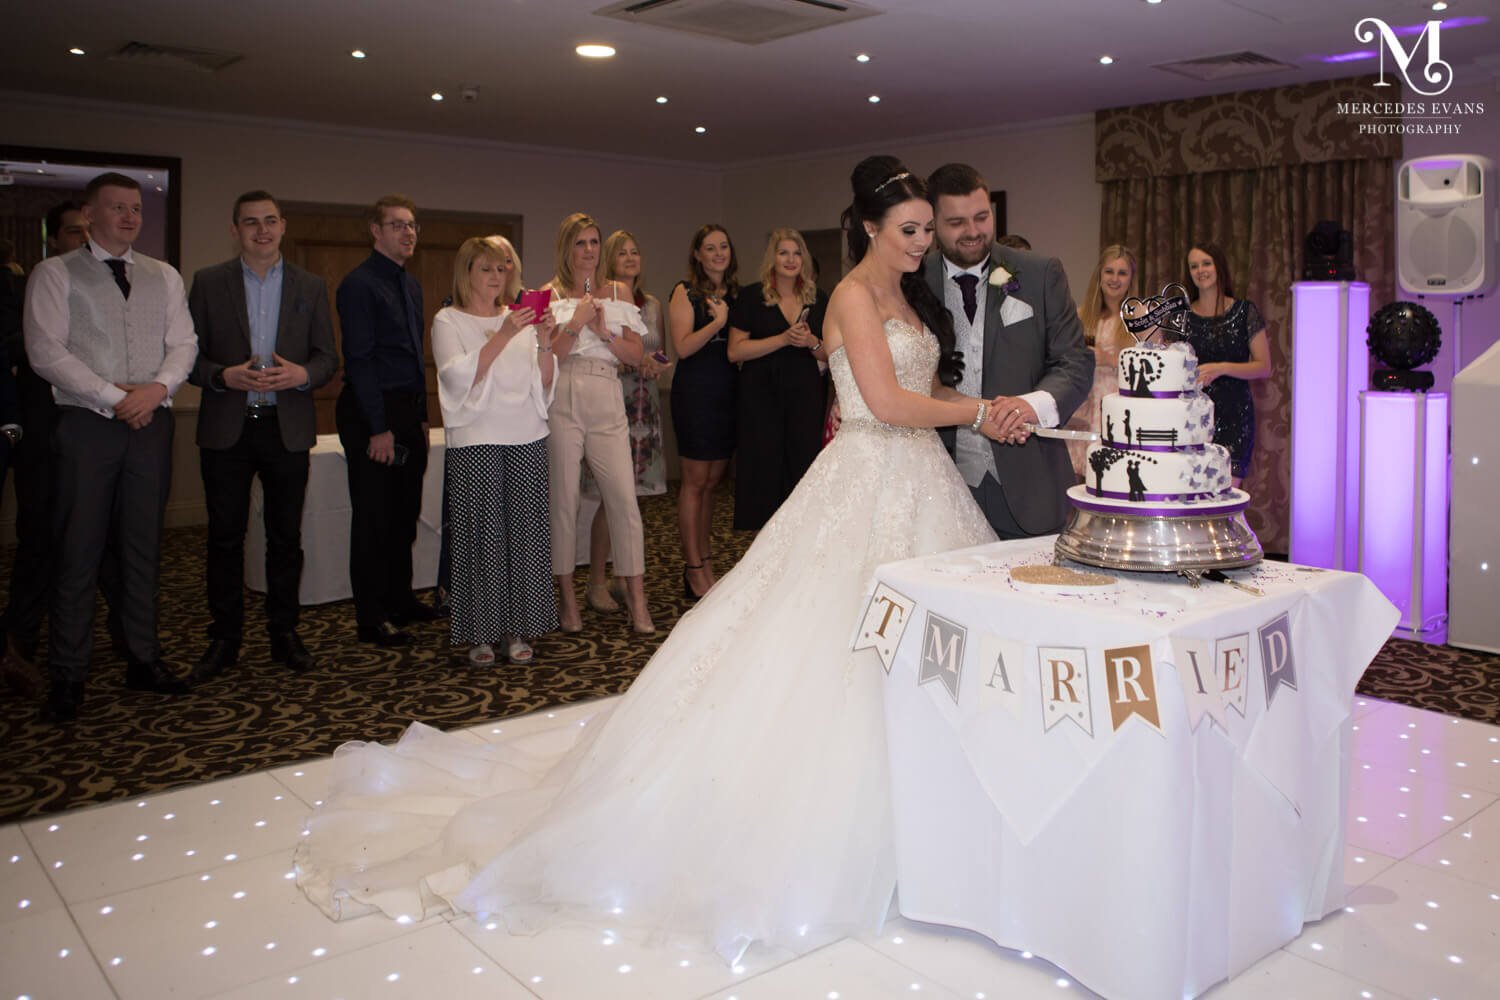 The bride and groom cut their wedding cake on the dance floor in the Frimley Suite at Frimley Hall Hotel